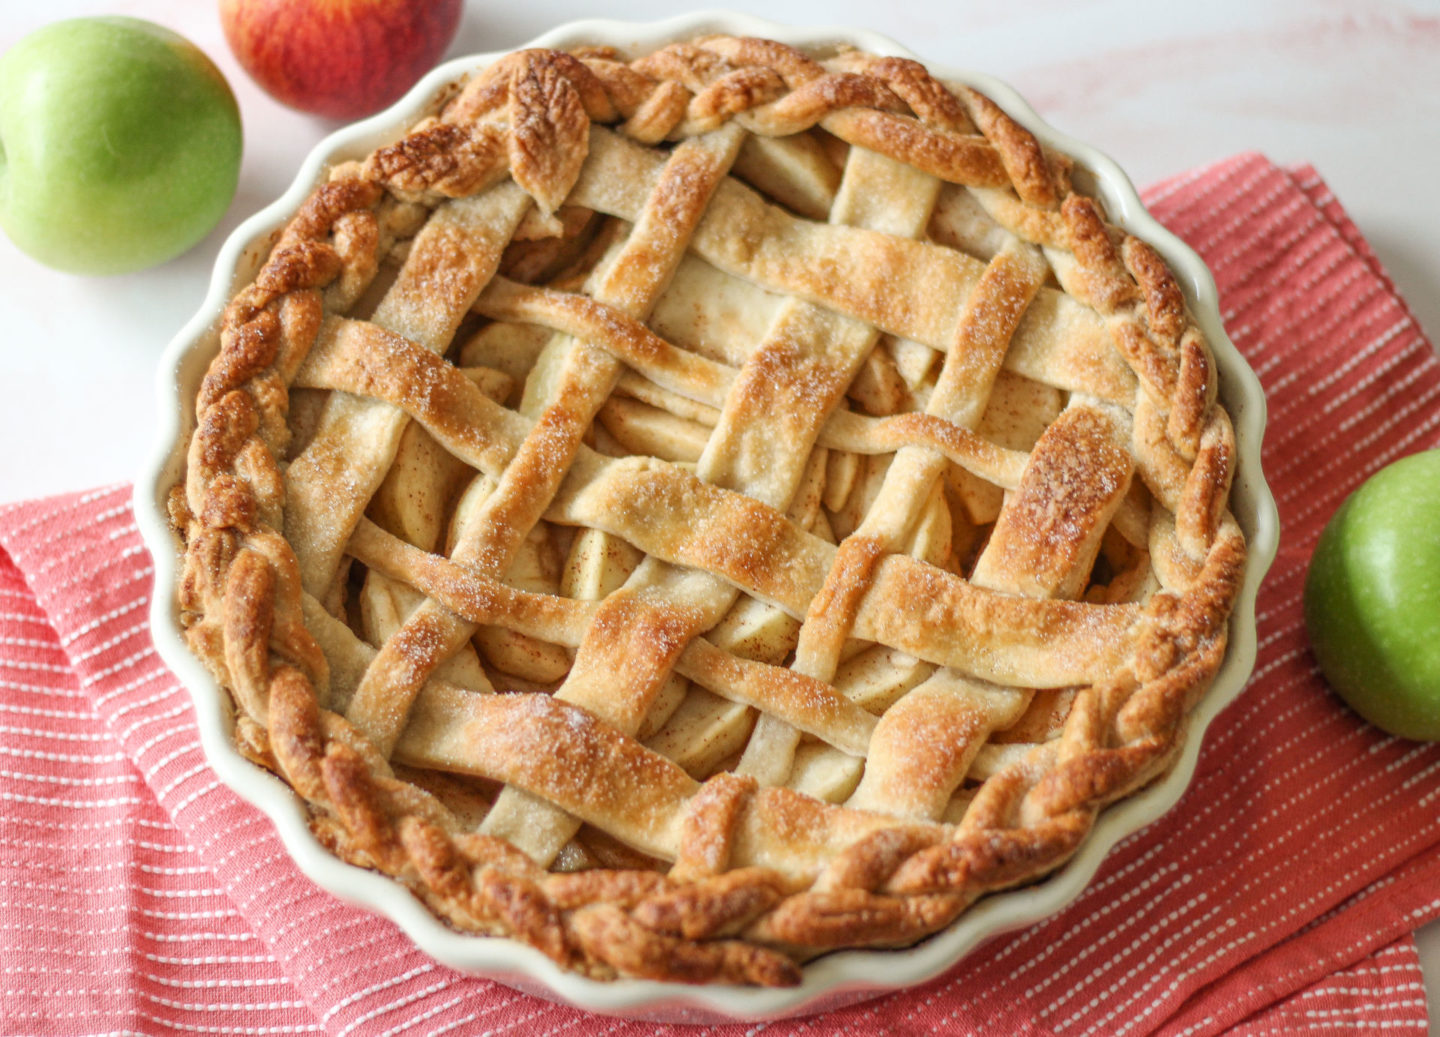 view from above of whole uncut lattice apple pie